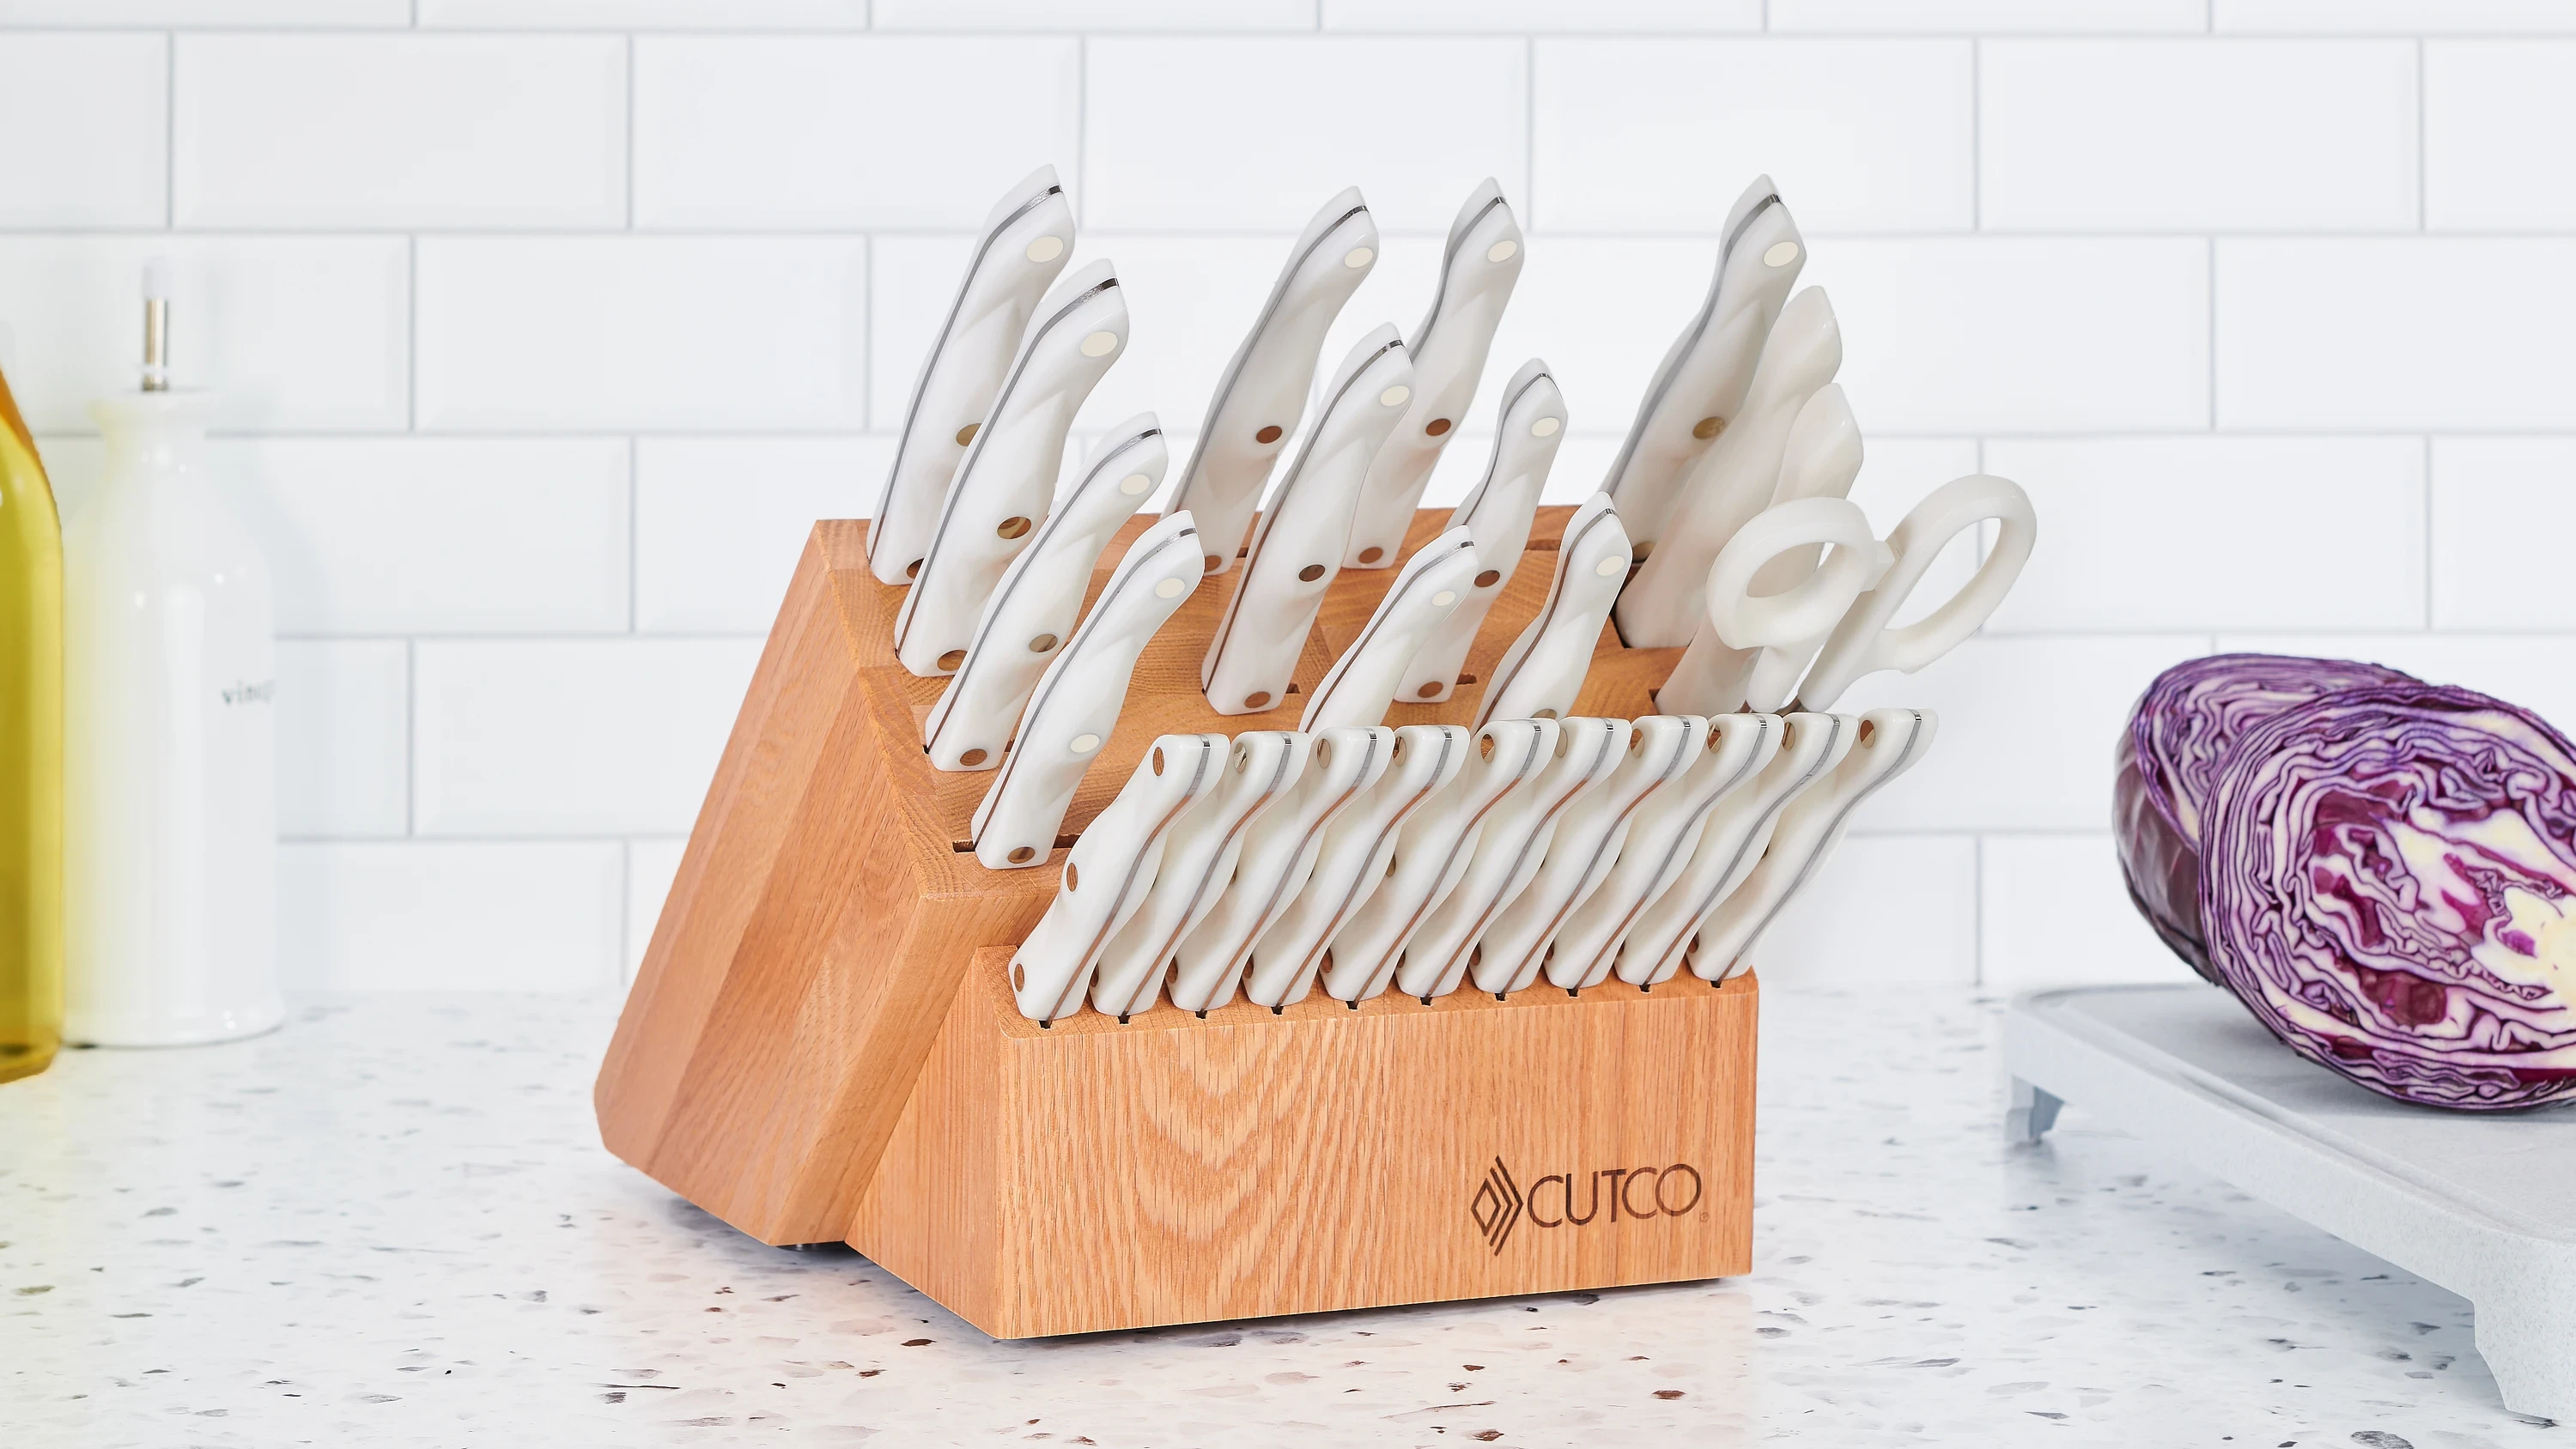 Santoku-Style Signature Set with Steak Knives with Block